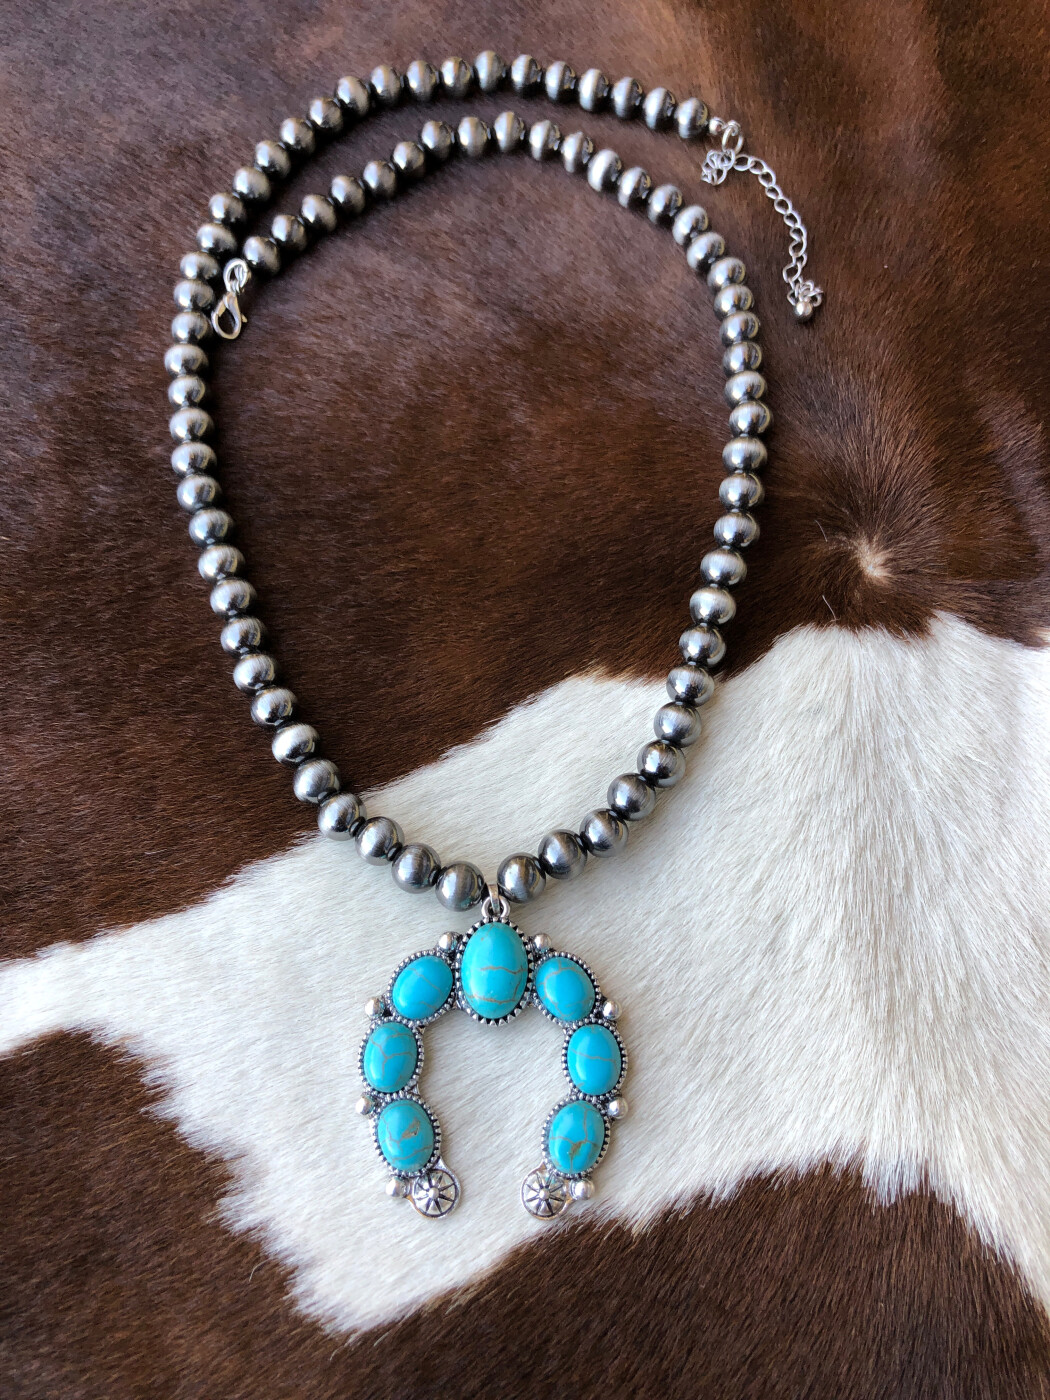 18-inch 10mm Navajo Pearls and Turquoise Bead Necklace by Paige Wallac -  Jewelry Lady Red River